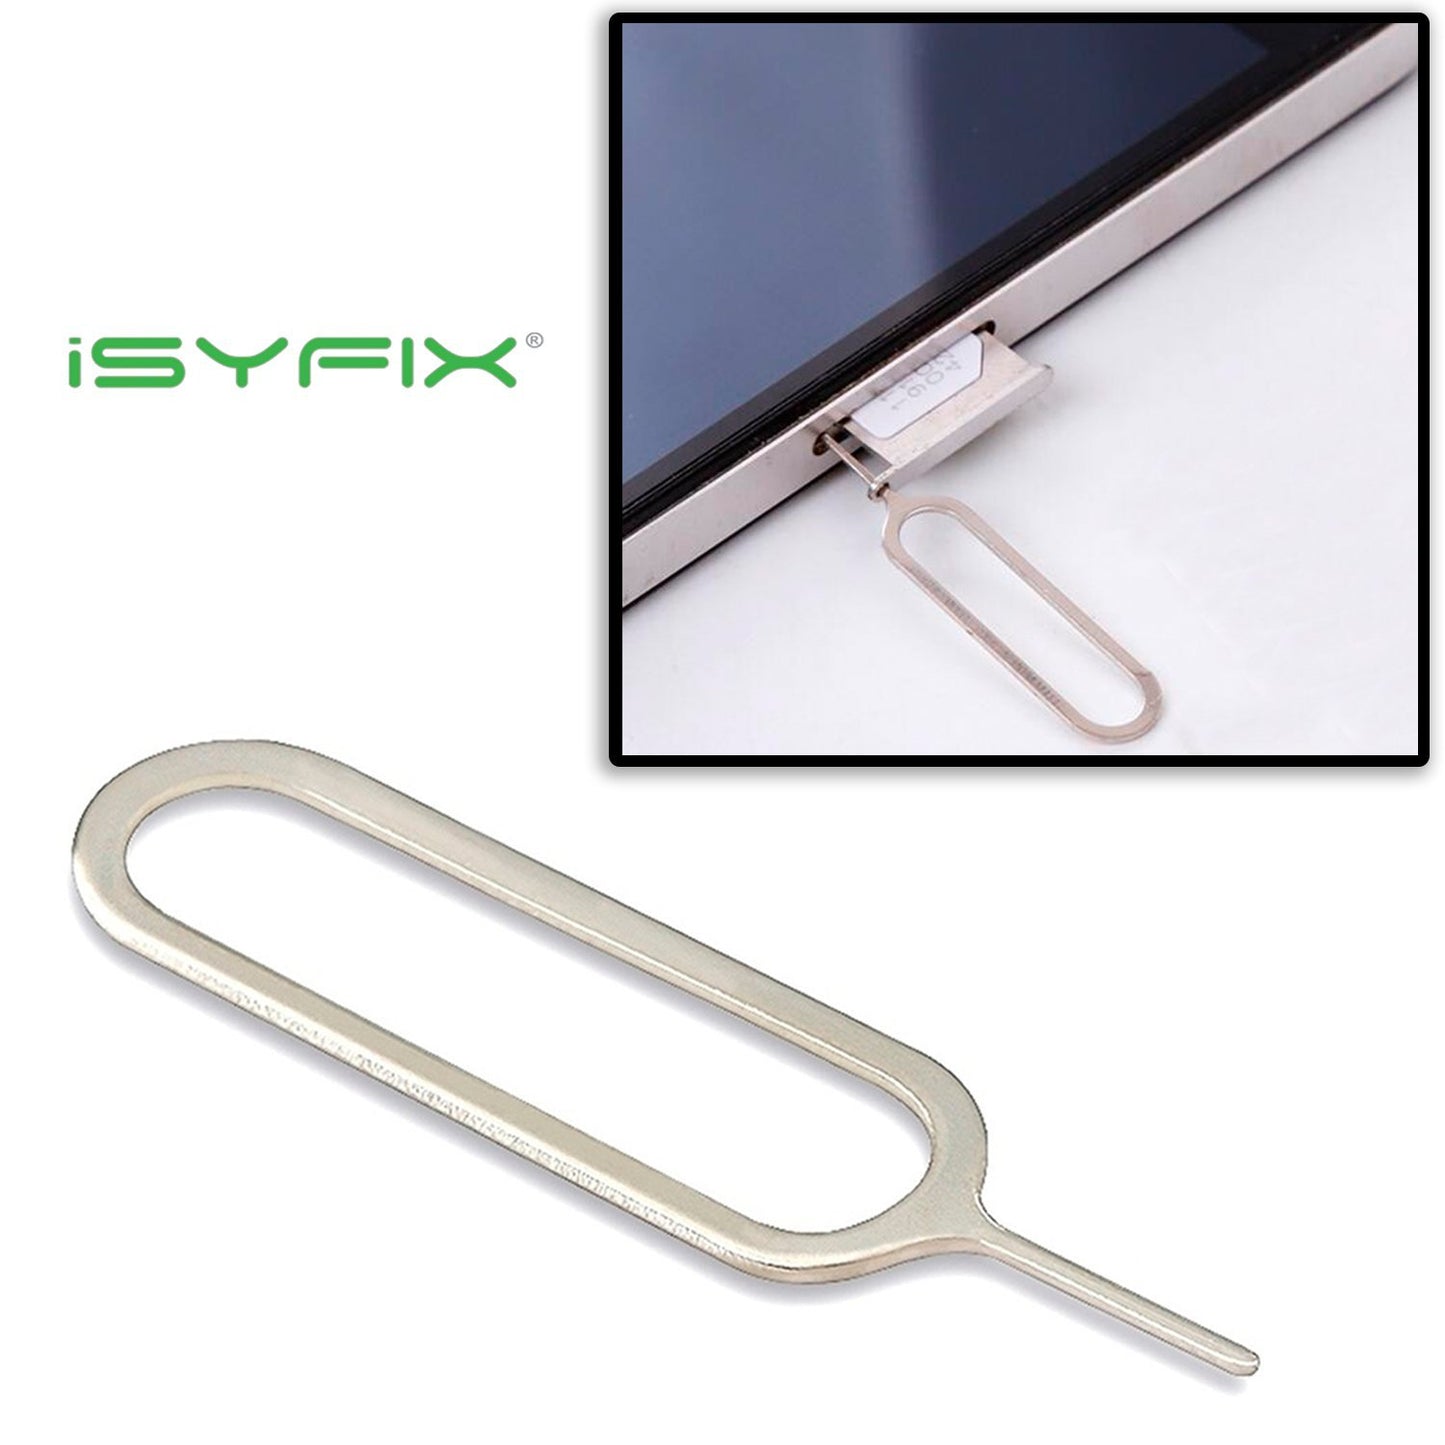 iSYFIX Sim Card Adapter Nano Micro - Standard 4 in 1 Converter Kit with Steel Tray Eject Pin